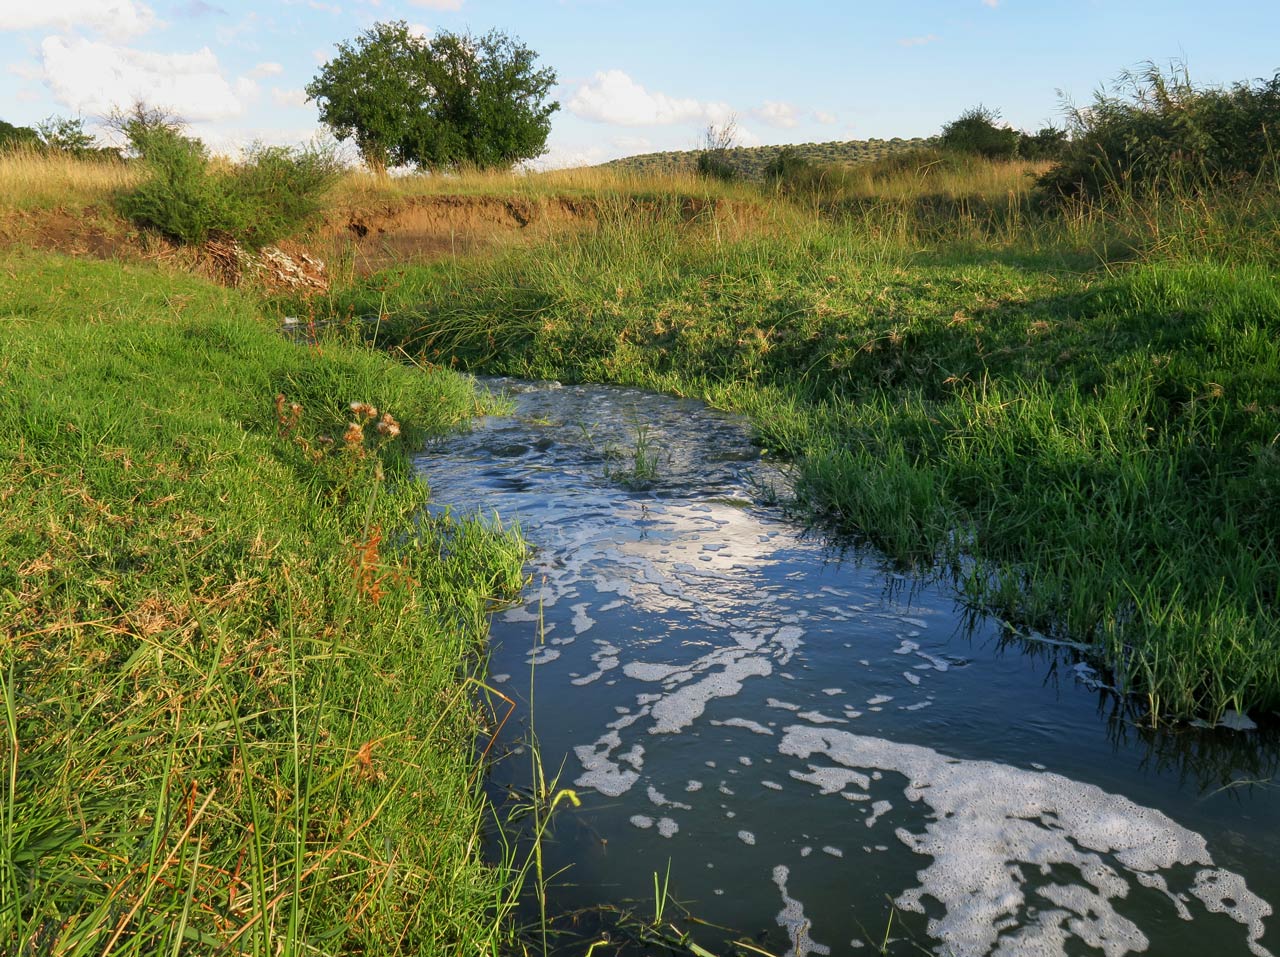 The stream of effluent runoff, which smells strongly of sewage, flows from Winburg’s failing wastewater treatment works to the dam from which the town’s drinking water is extracted.